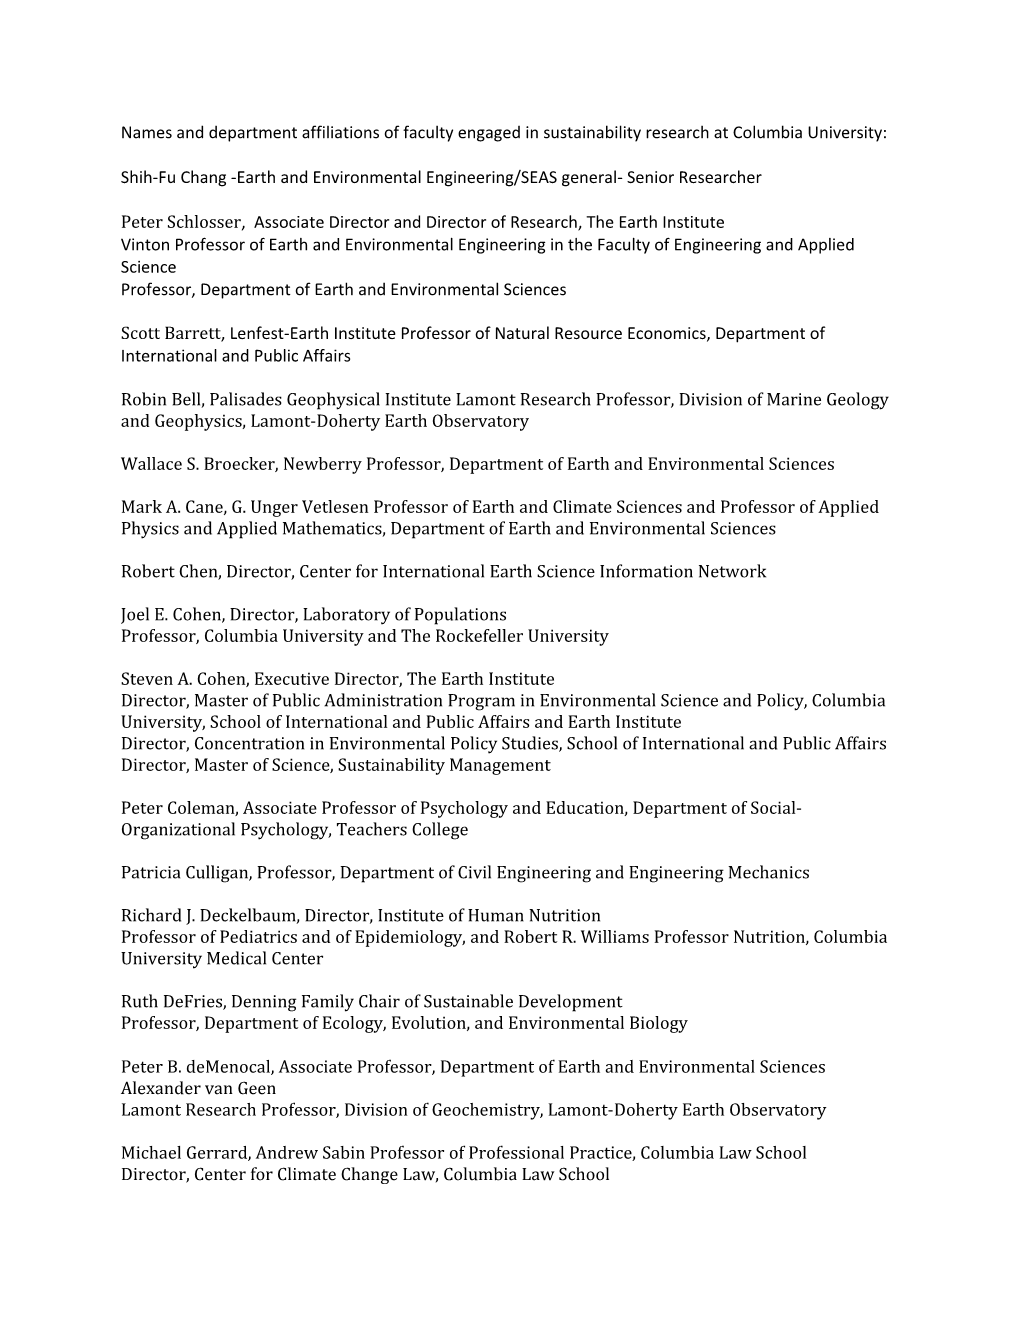 Names and Department Affiliations of Faculty Engaged in Sustainability Research at Columbia